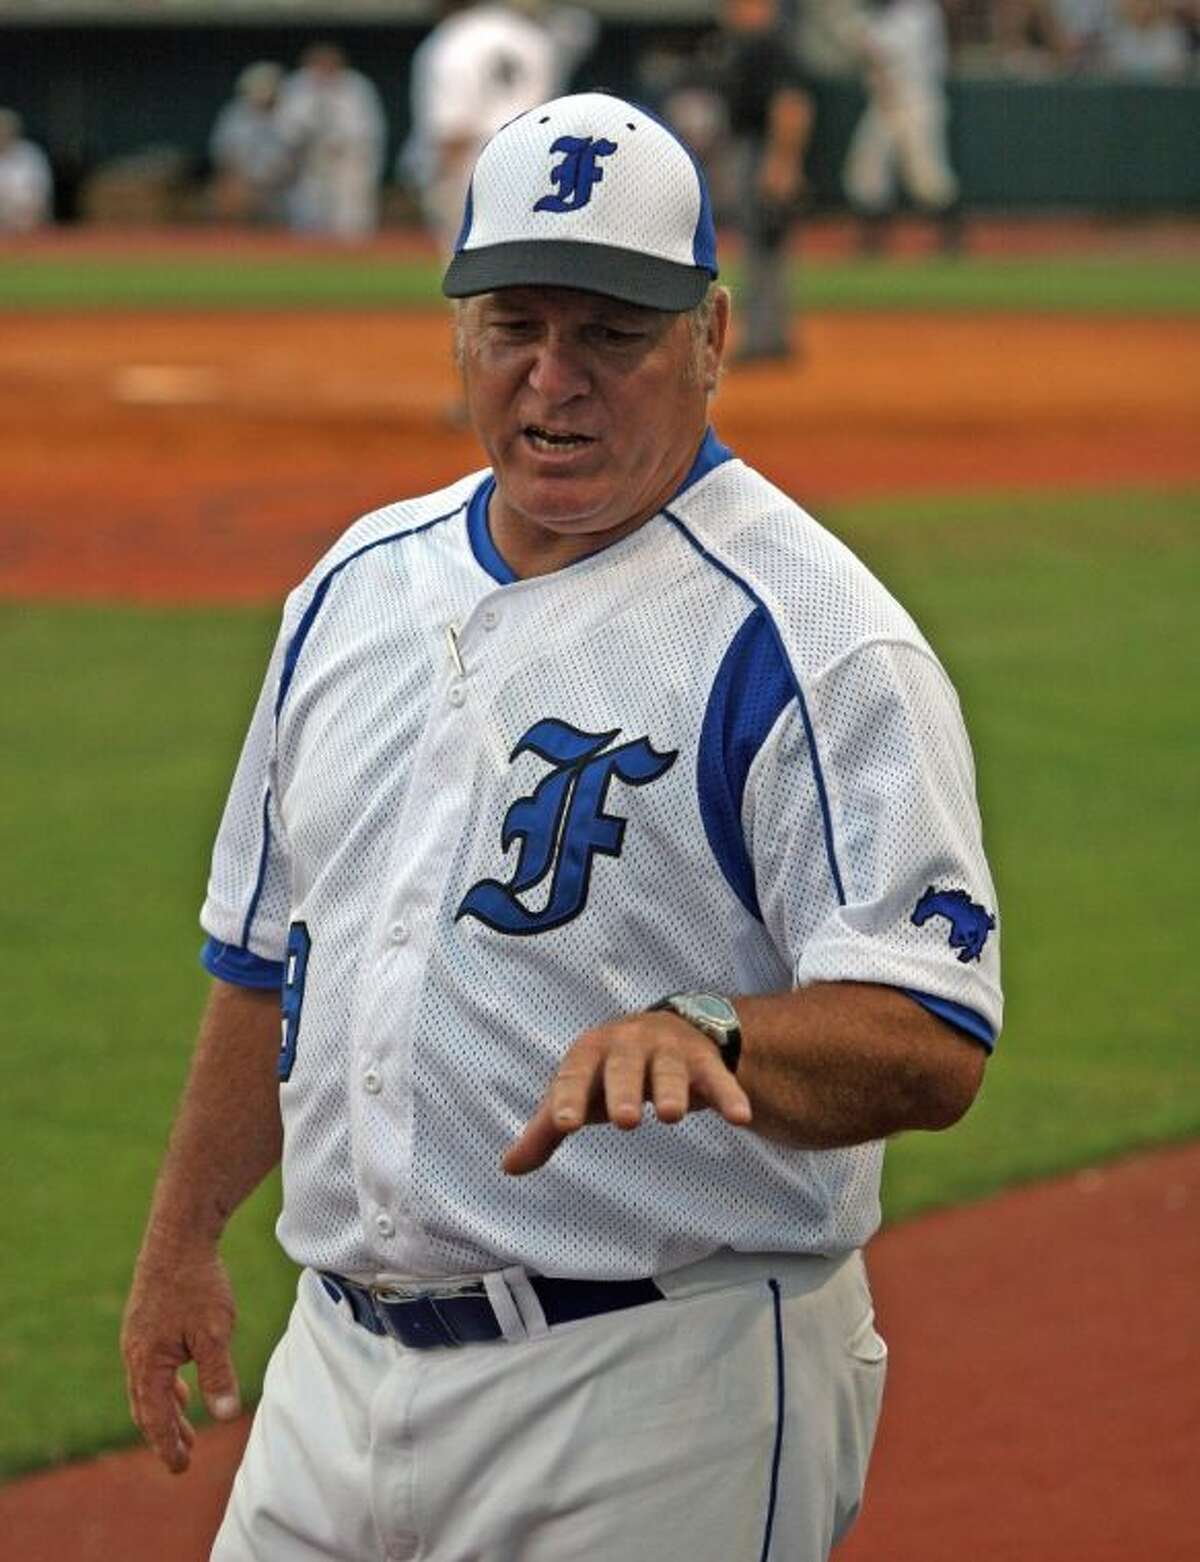 Friendswood baseball coach Charlie Taylor has seen his team already lock up a playoff berth. Now the Mustangs are zeroing in on a District 24-4A title.